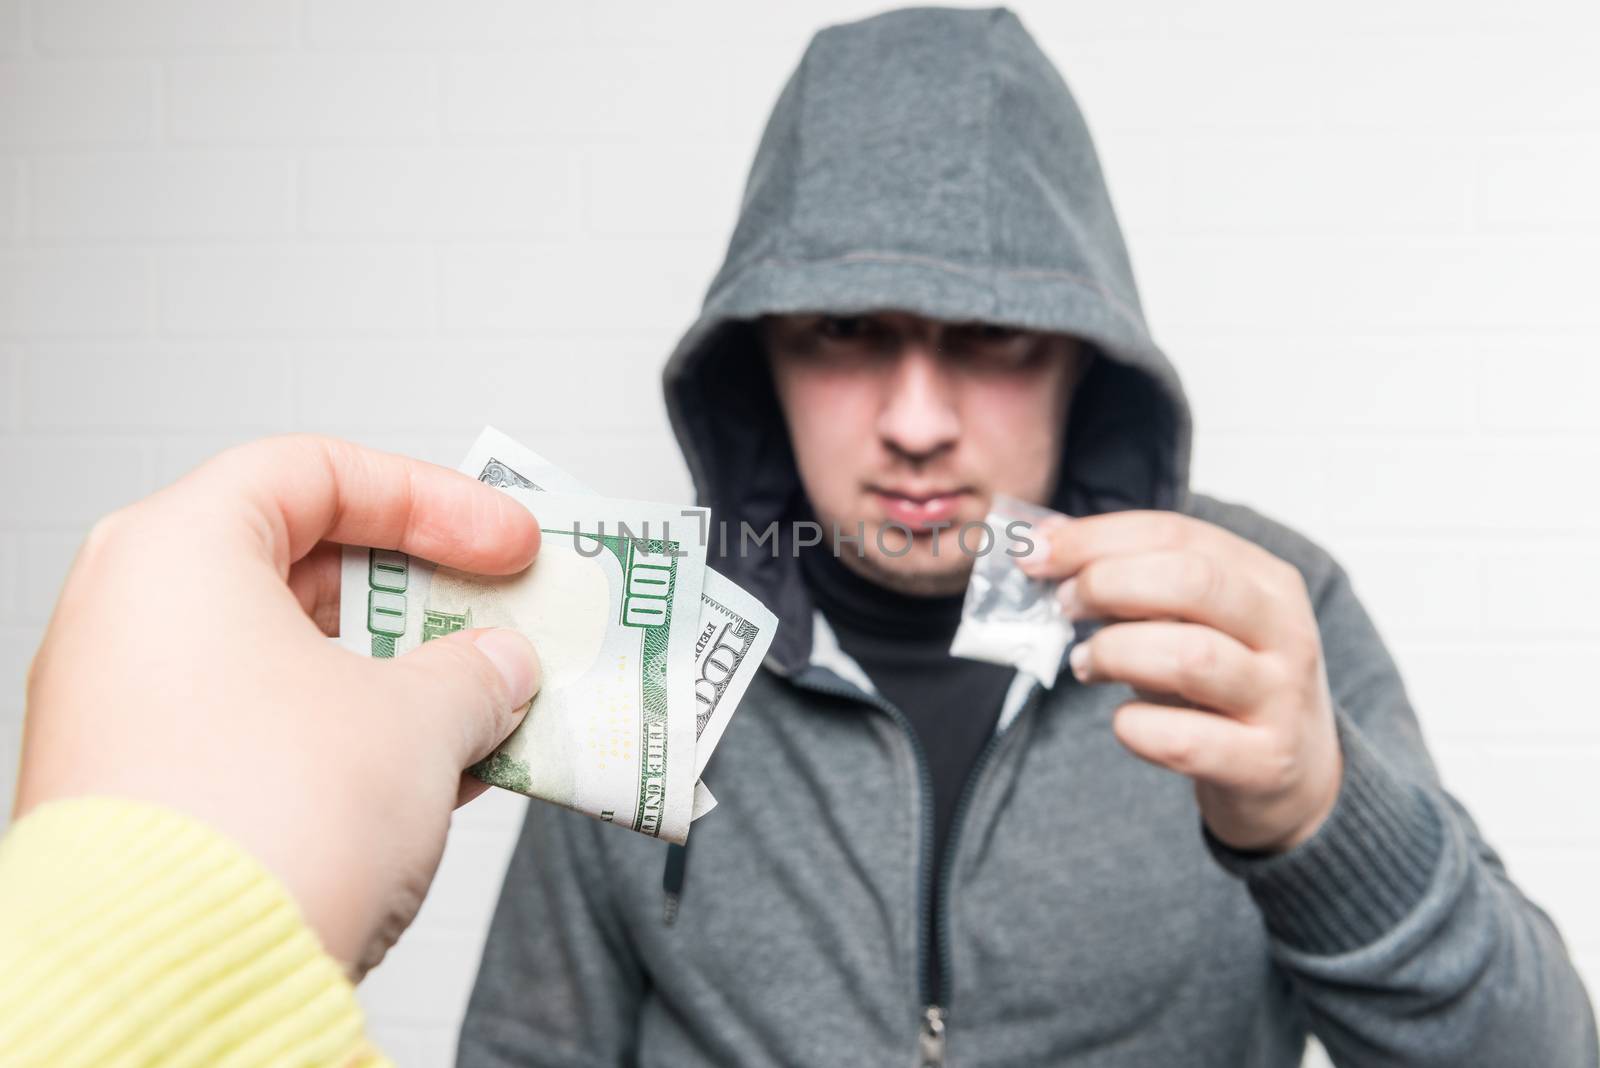 The buyer and the drug dealer carry out the transaction by kosmsos111